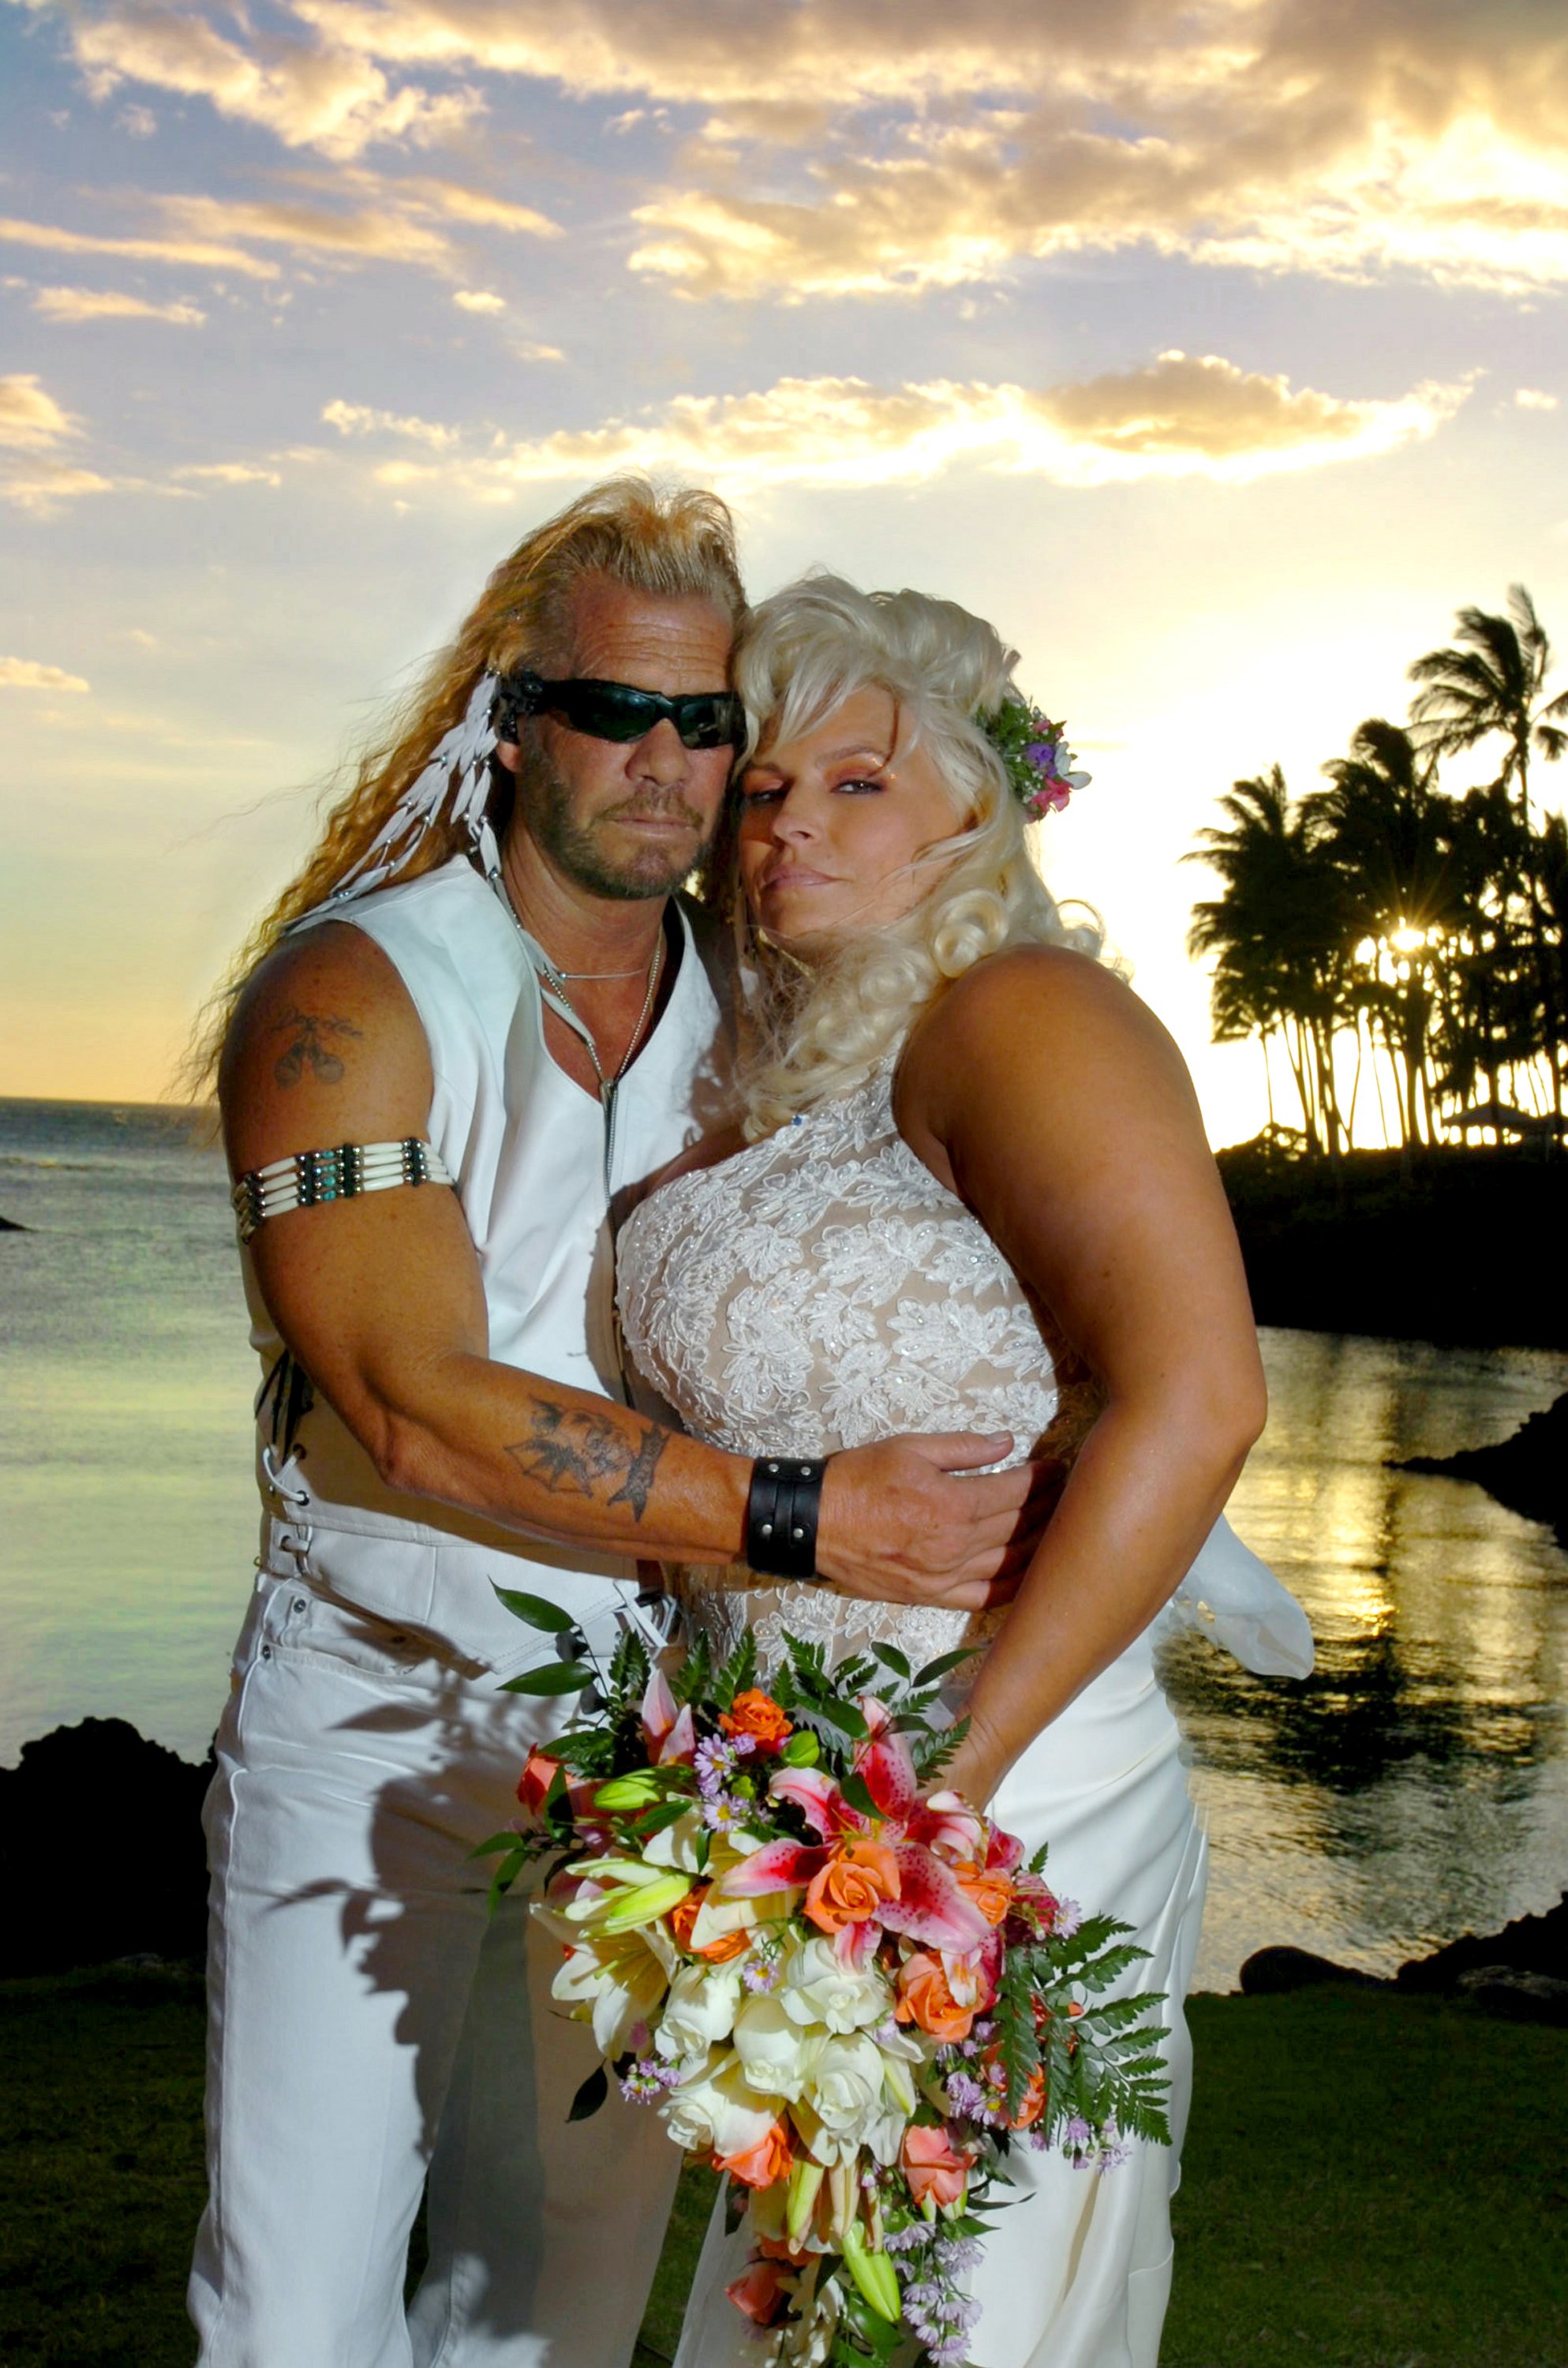 The late Beth Chapman at her wedding to Dog The Bounty Hunter in 2016. | Photo: Getty Images